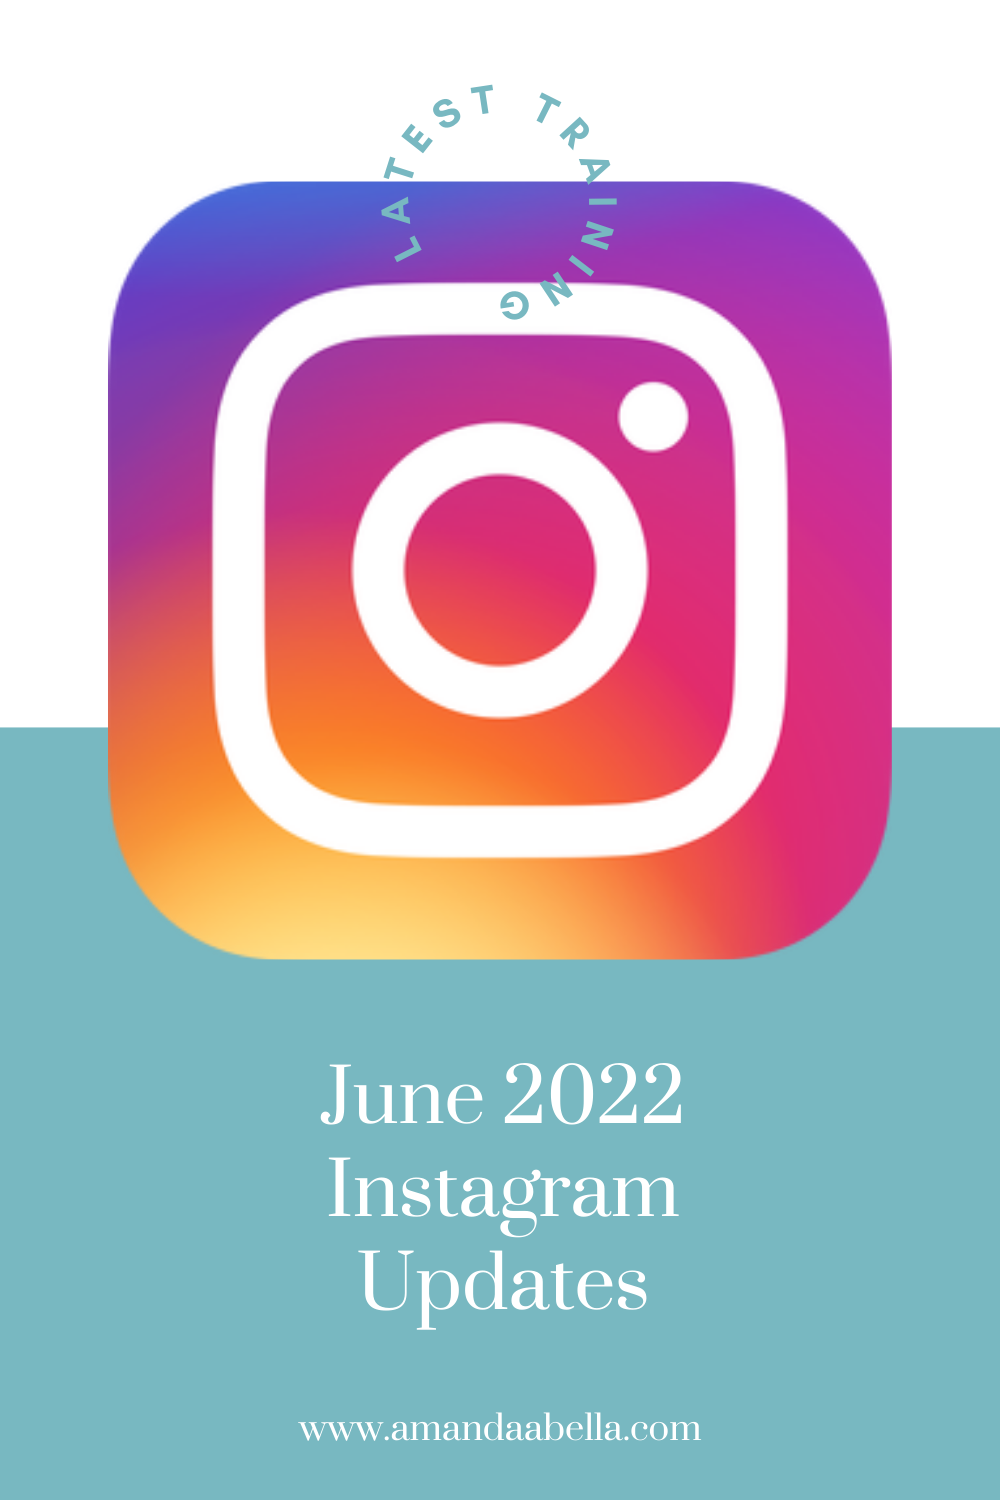 Learn the Instagram Updates for June 2022.